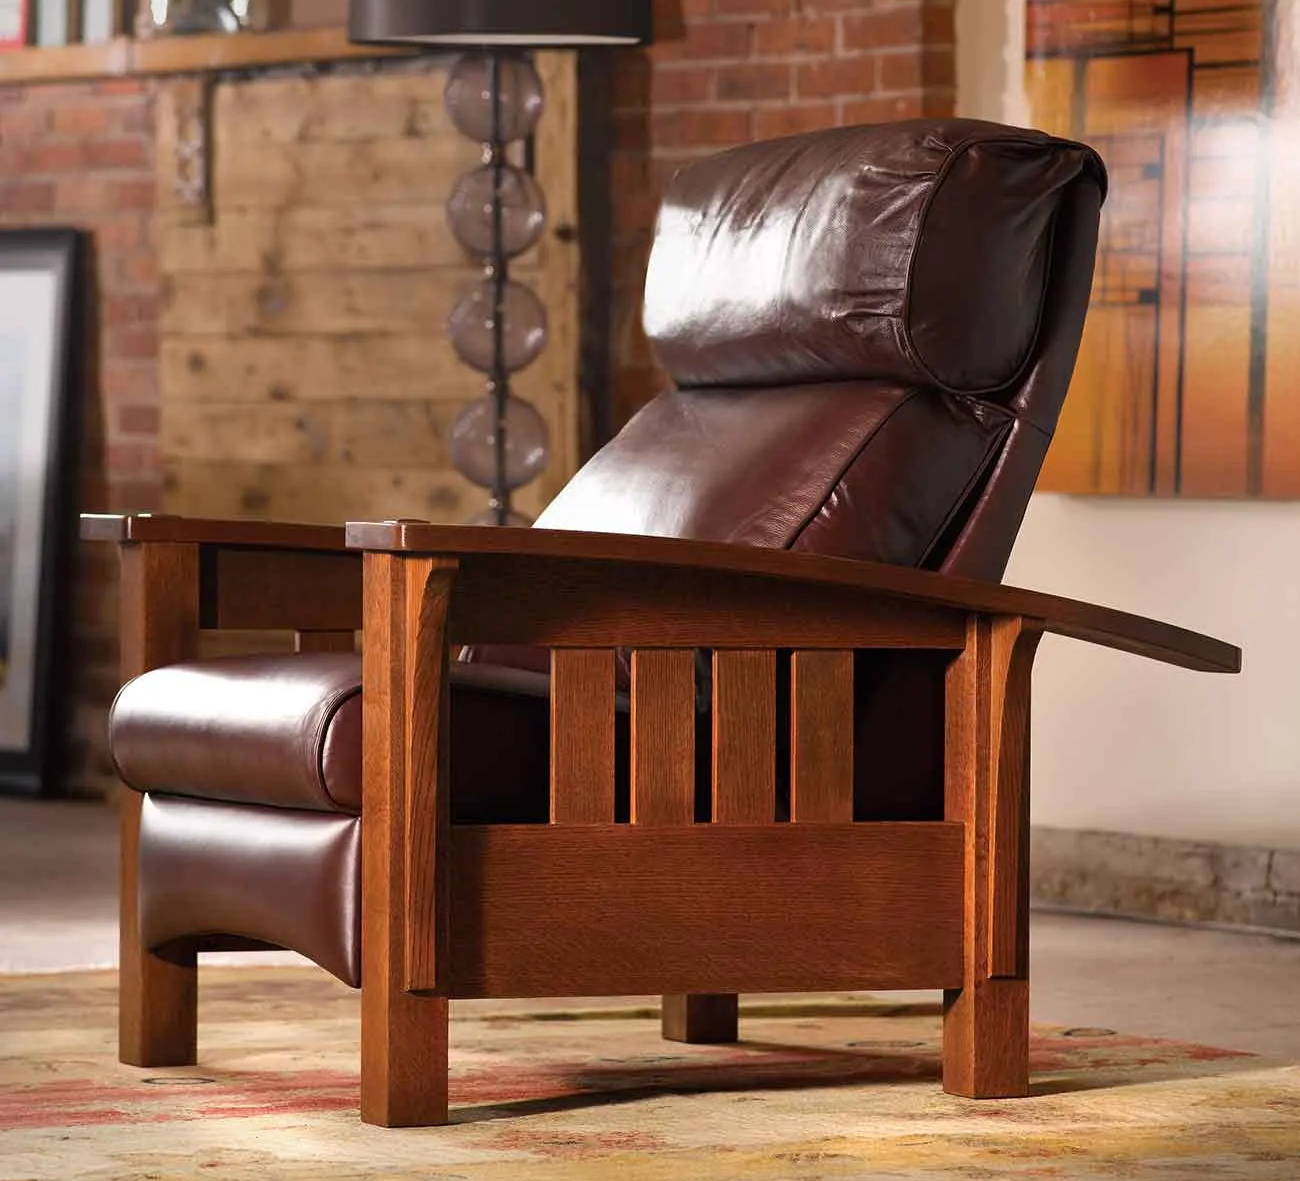 A Review of The Stickley Mission Furniture Collection